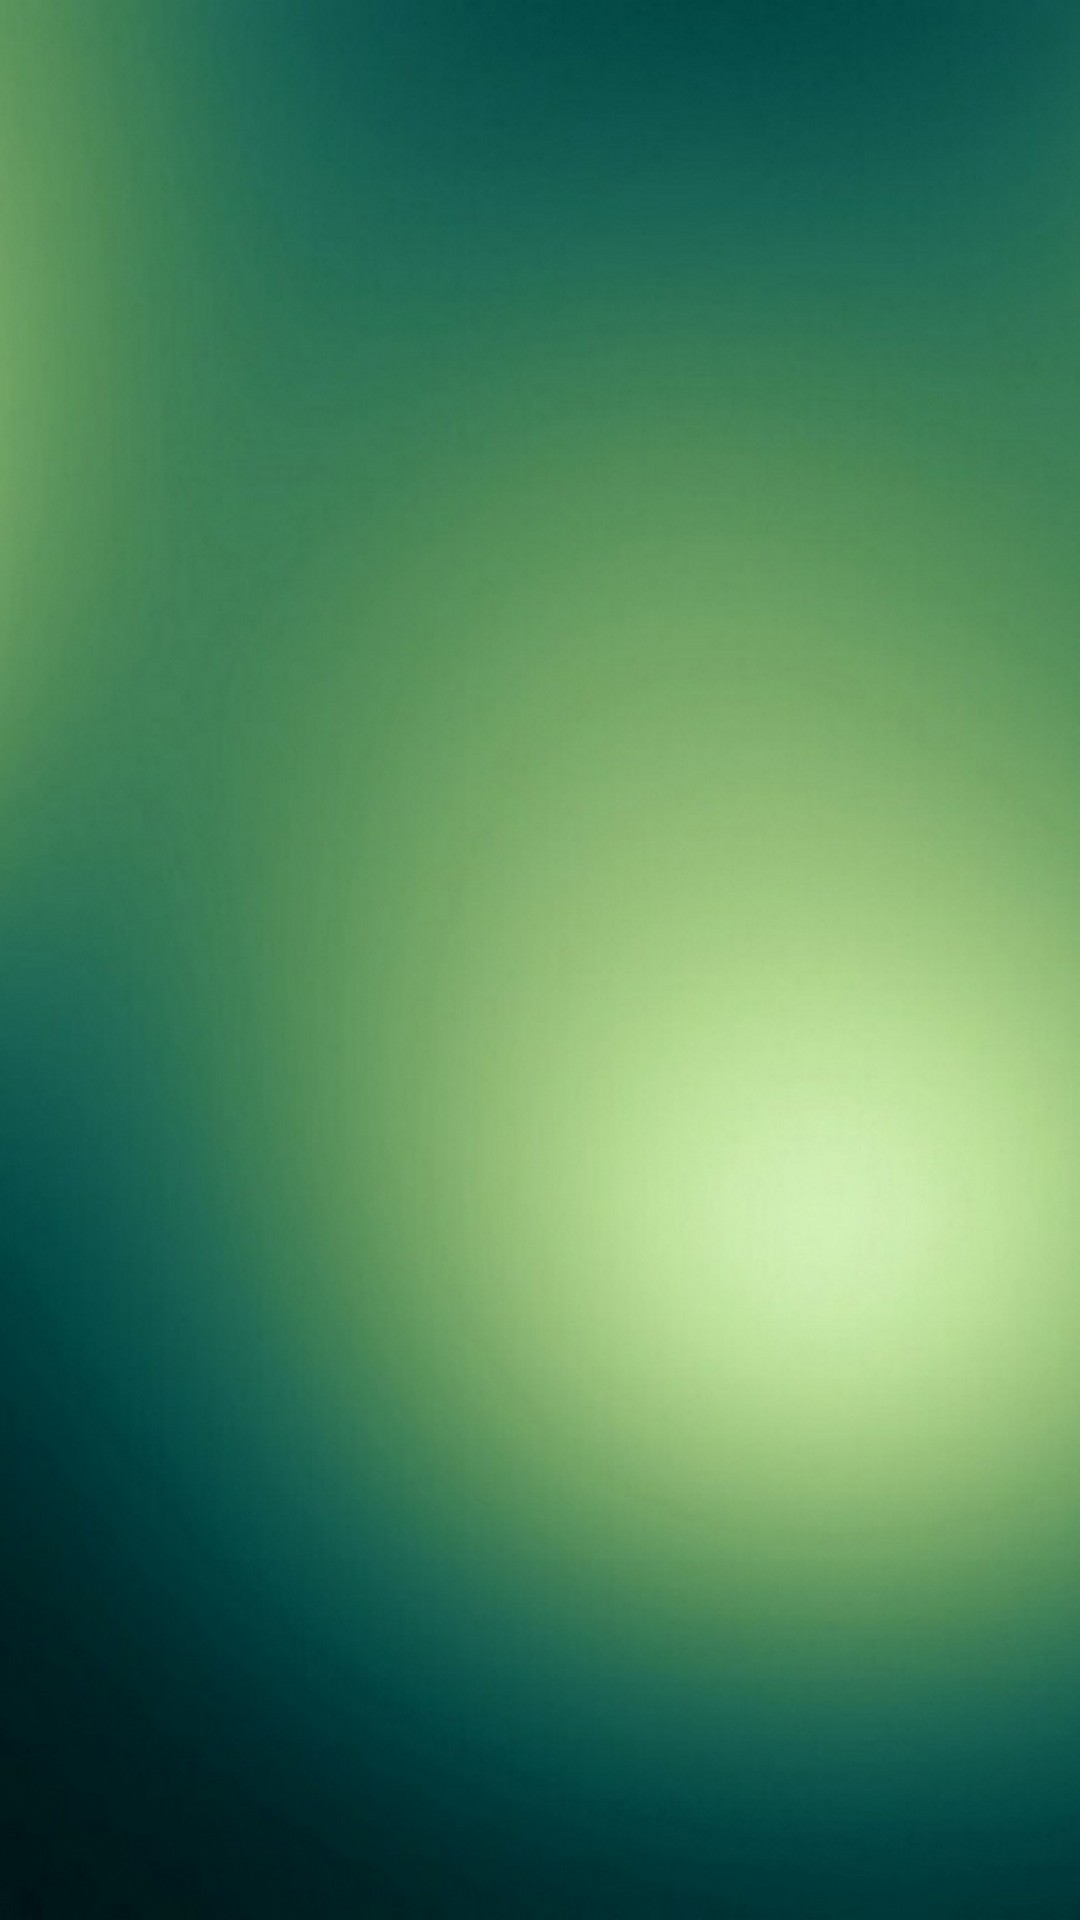 Wallpaper Emerald Green Android with resolution 1080X1920 pixel. You can make this wallpaper for your Android backgrounds, Tablet, Smartphones Screensavers and Mobile Phone Lock Screen